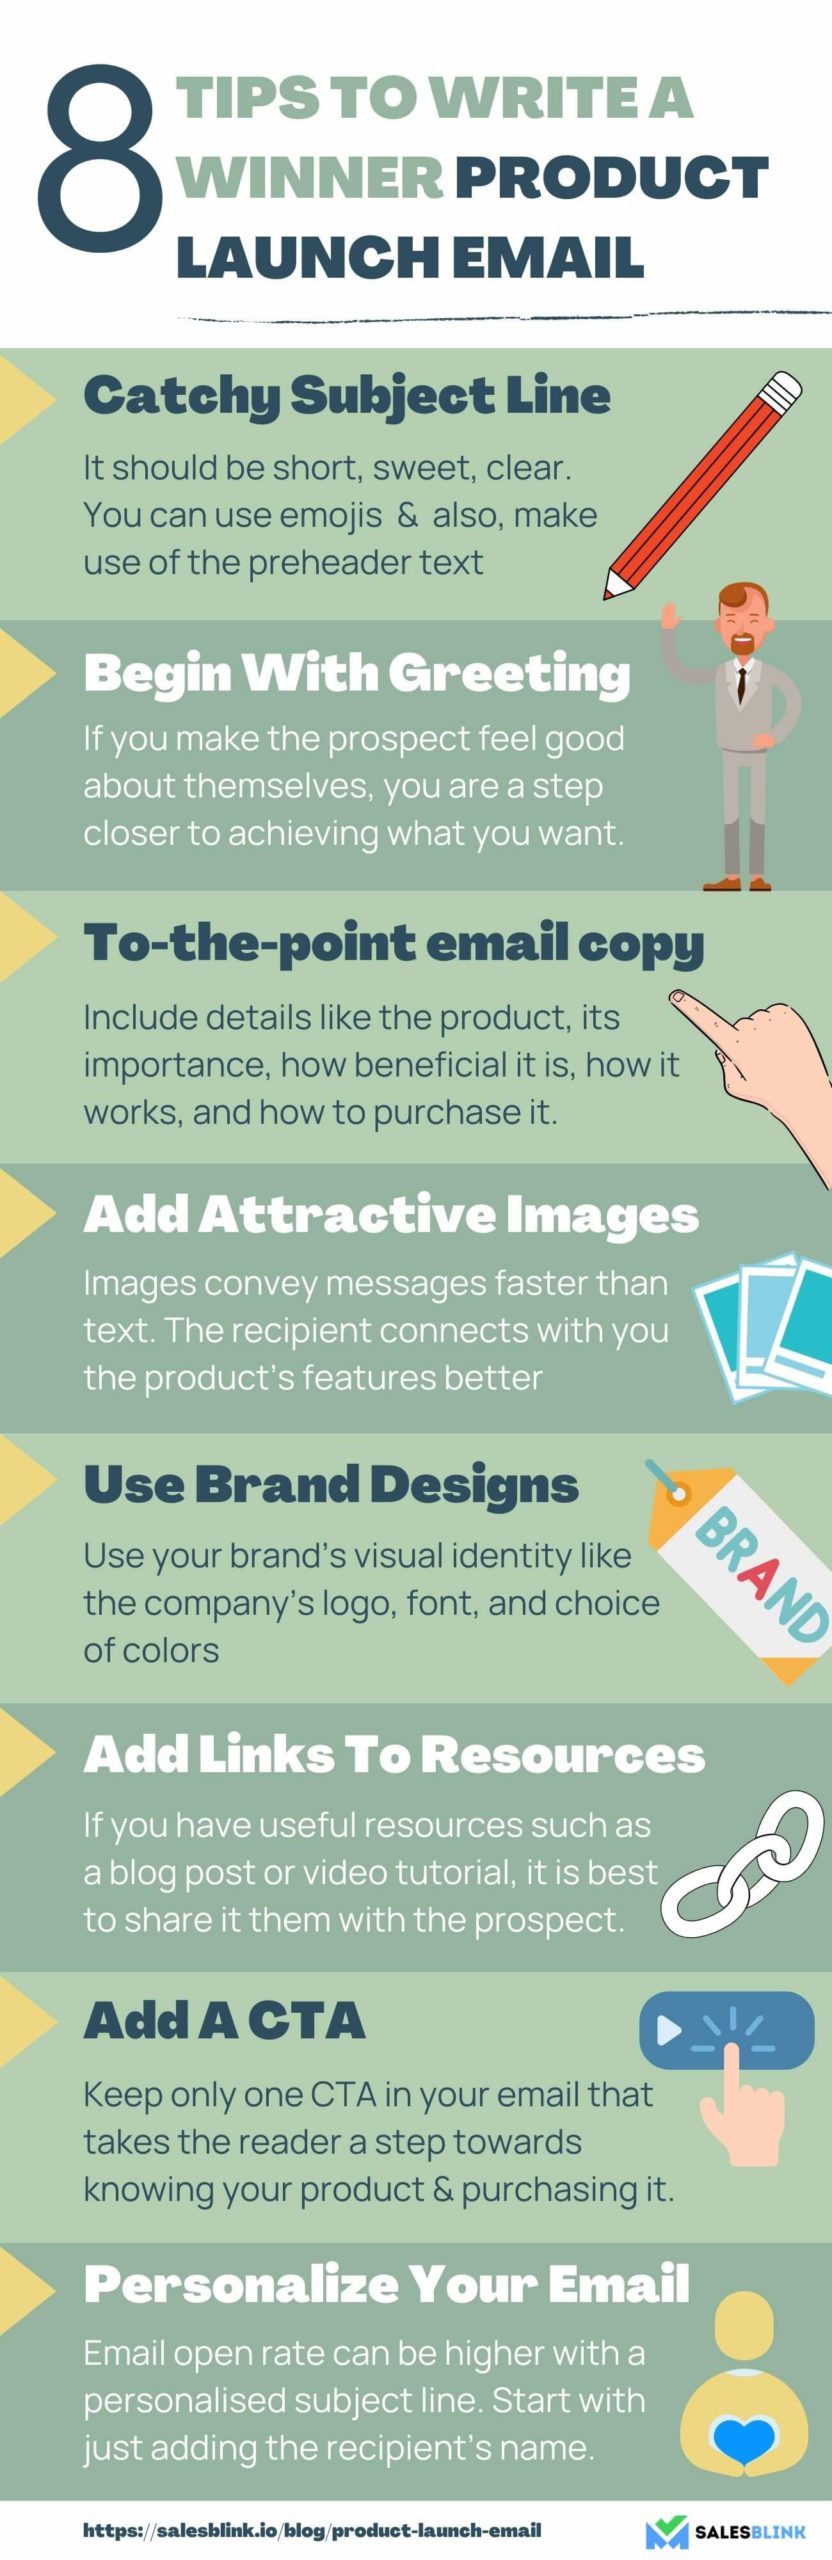 8 tips to write a winner product launch email - Infographic 